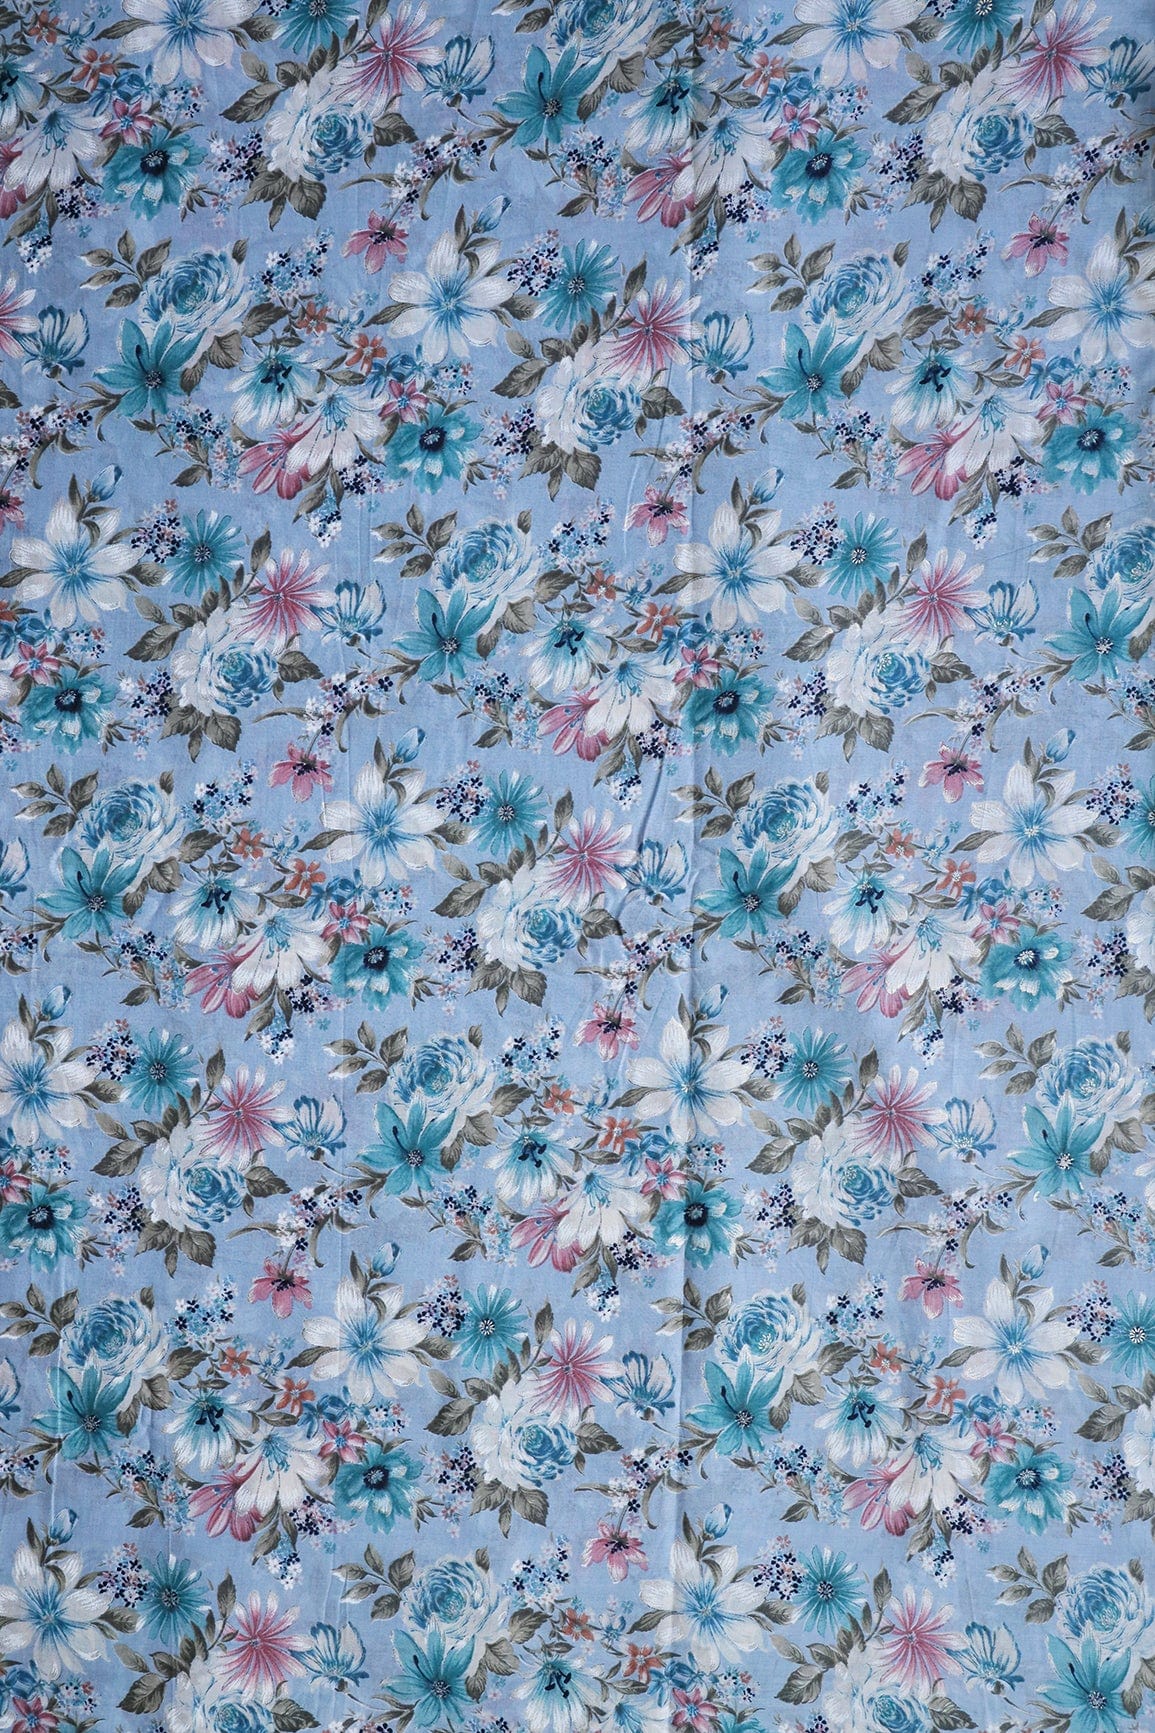 doeraa Prints Pastel Blue And White Color Floral Foil Print On Pure Mul Cotton Fabric